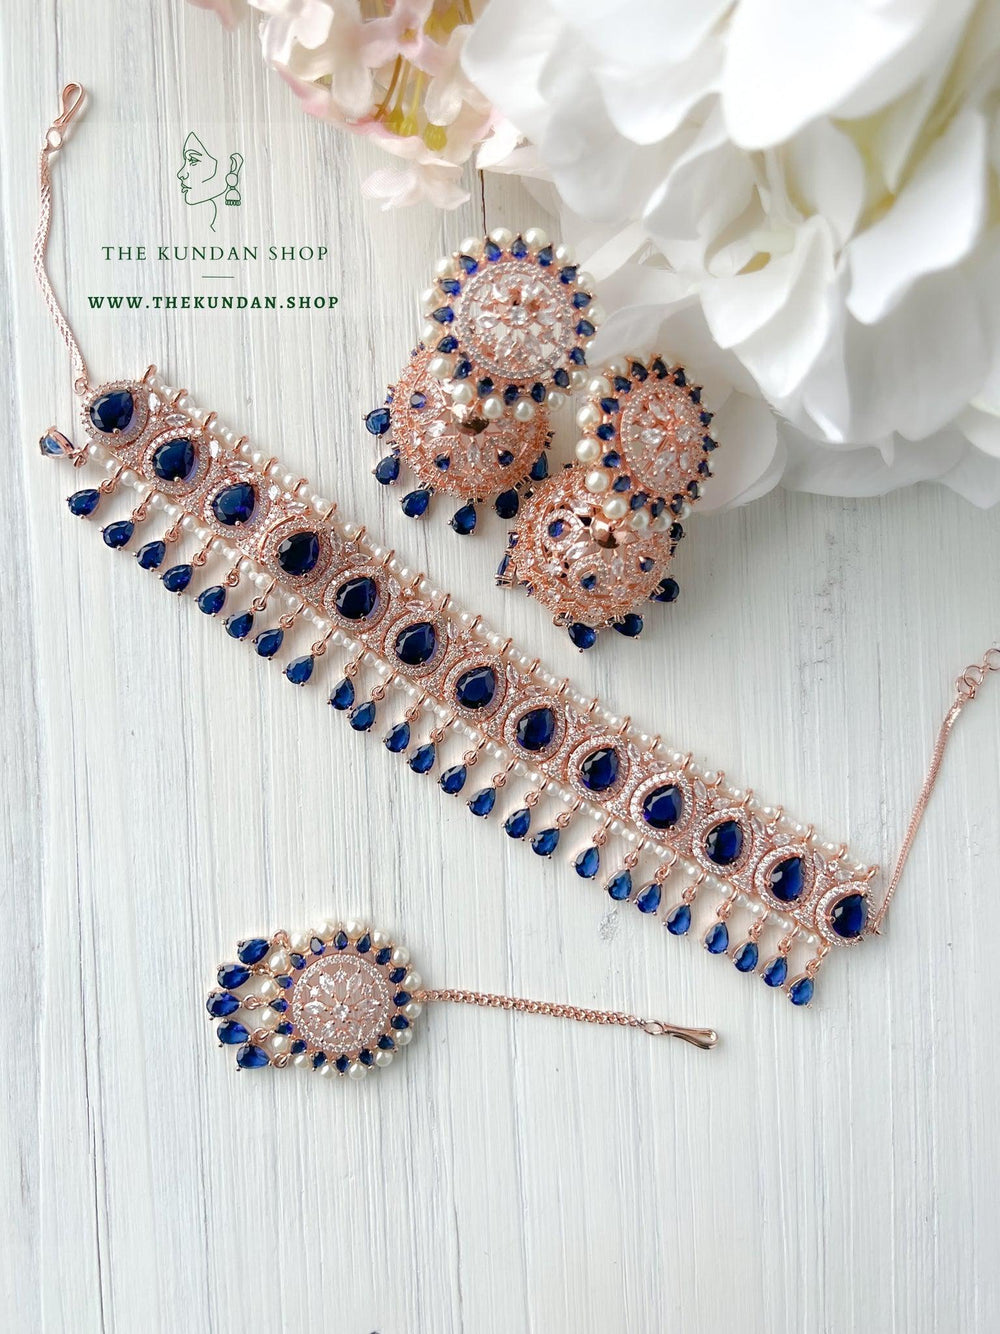 A Teardrop Stone in Rose Gold & Sapphire Necklace Sets THE KUNDAN SHOP 